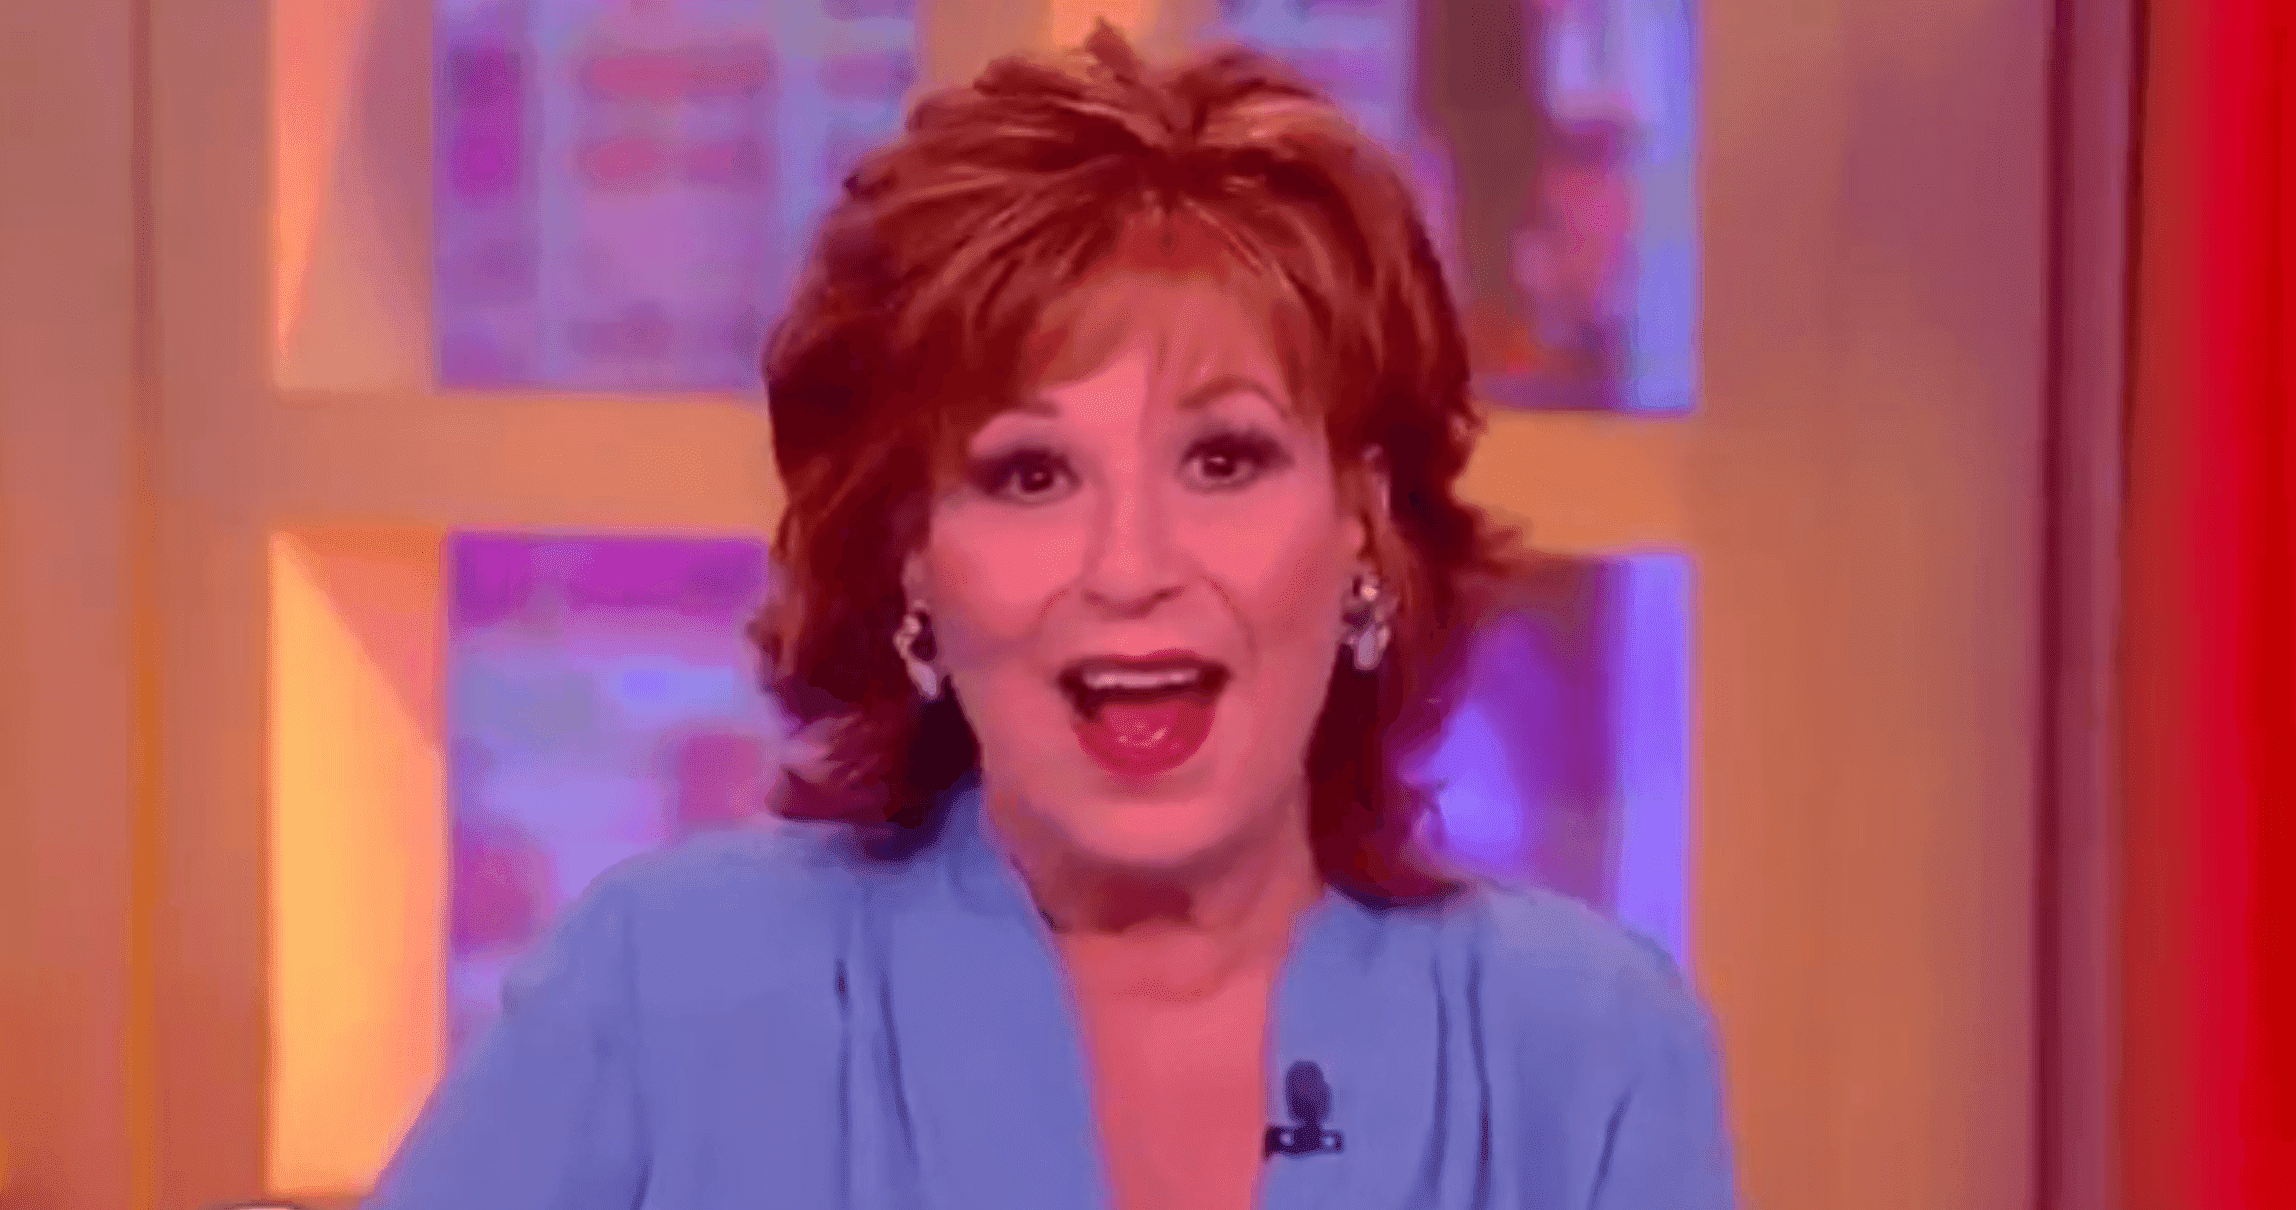 Joy Behar during a taping of "The View" | Photo: Twitter/LevineJonathan